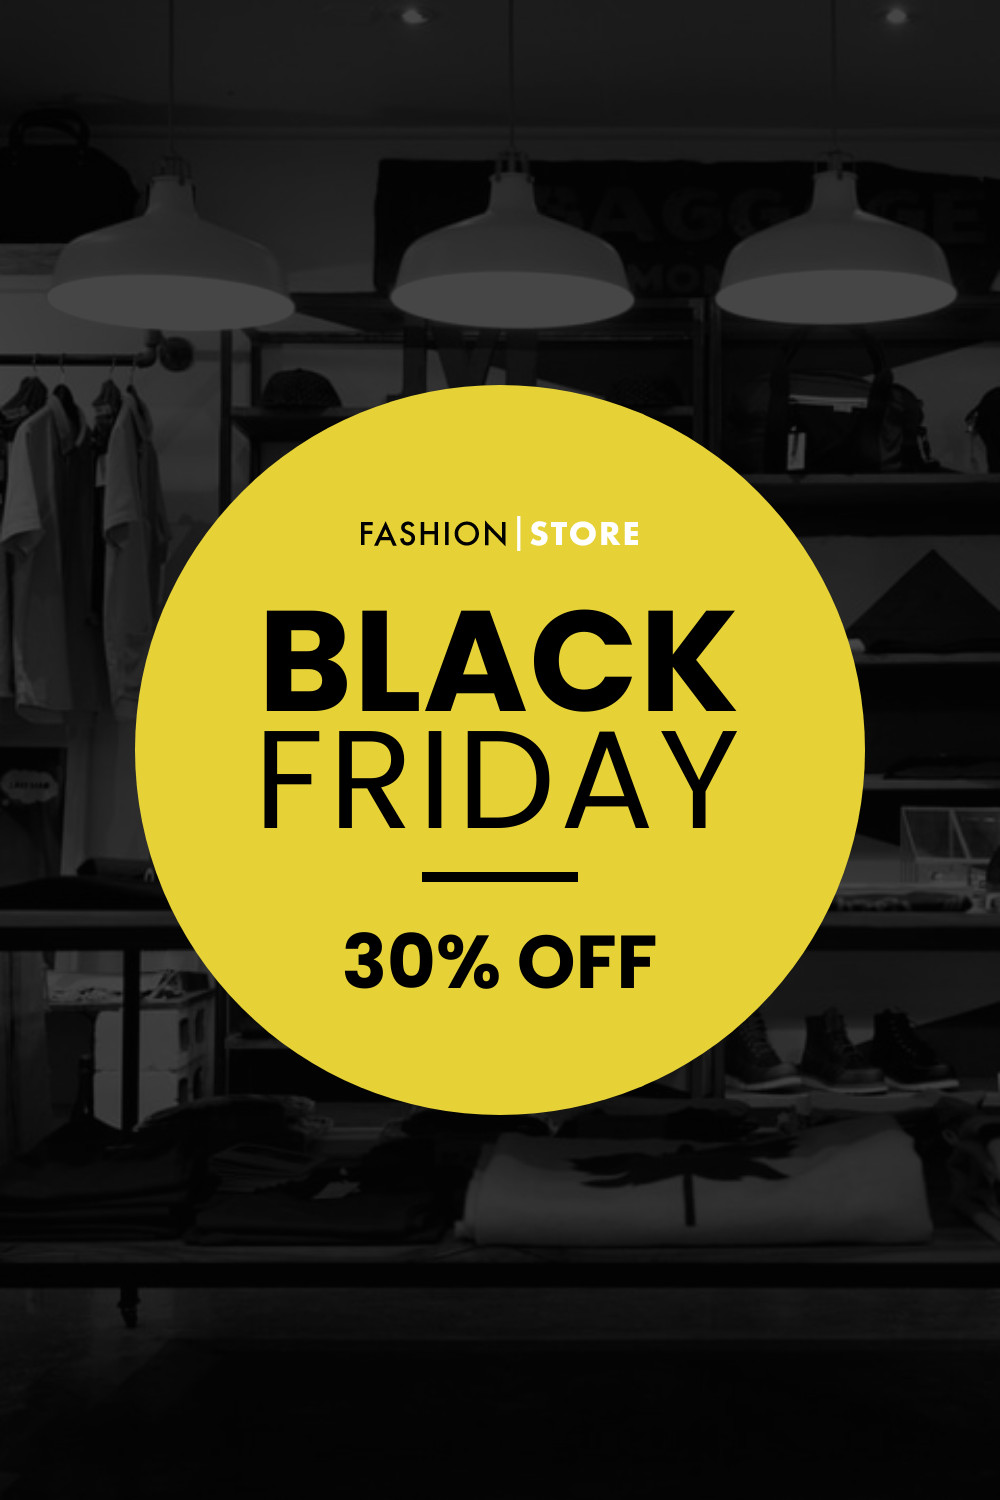 Black Friday 30 Fashion Store Facebook Cover 820x360